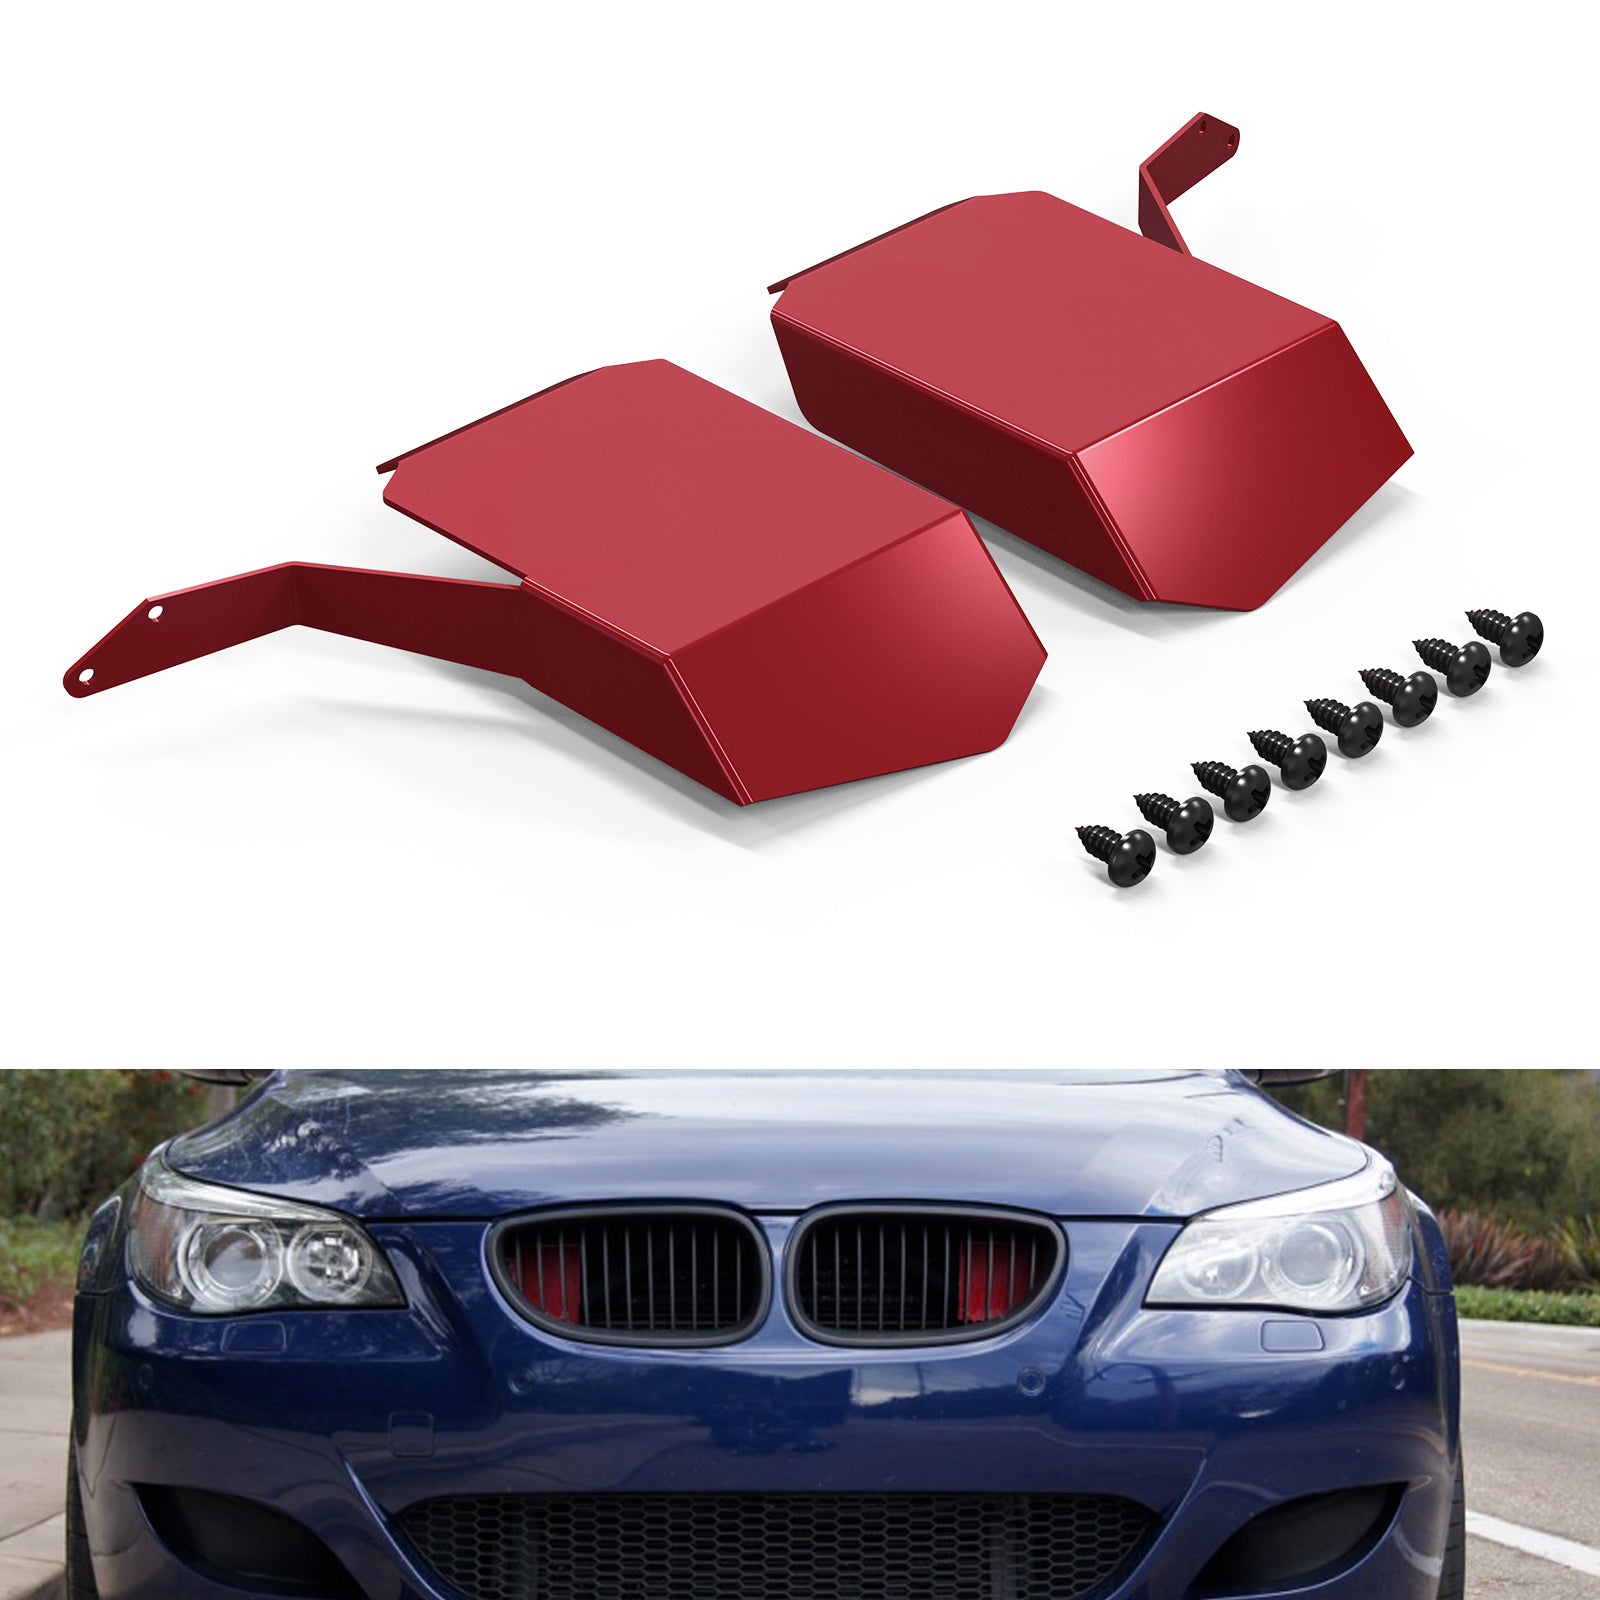 BEVINSEE Air Induction Intake Scoops for BMW E60 E61 M5 2004-2009